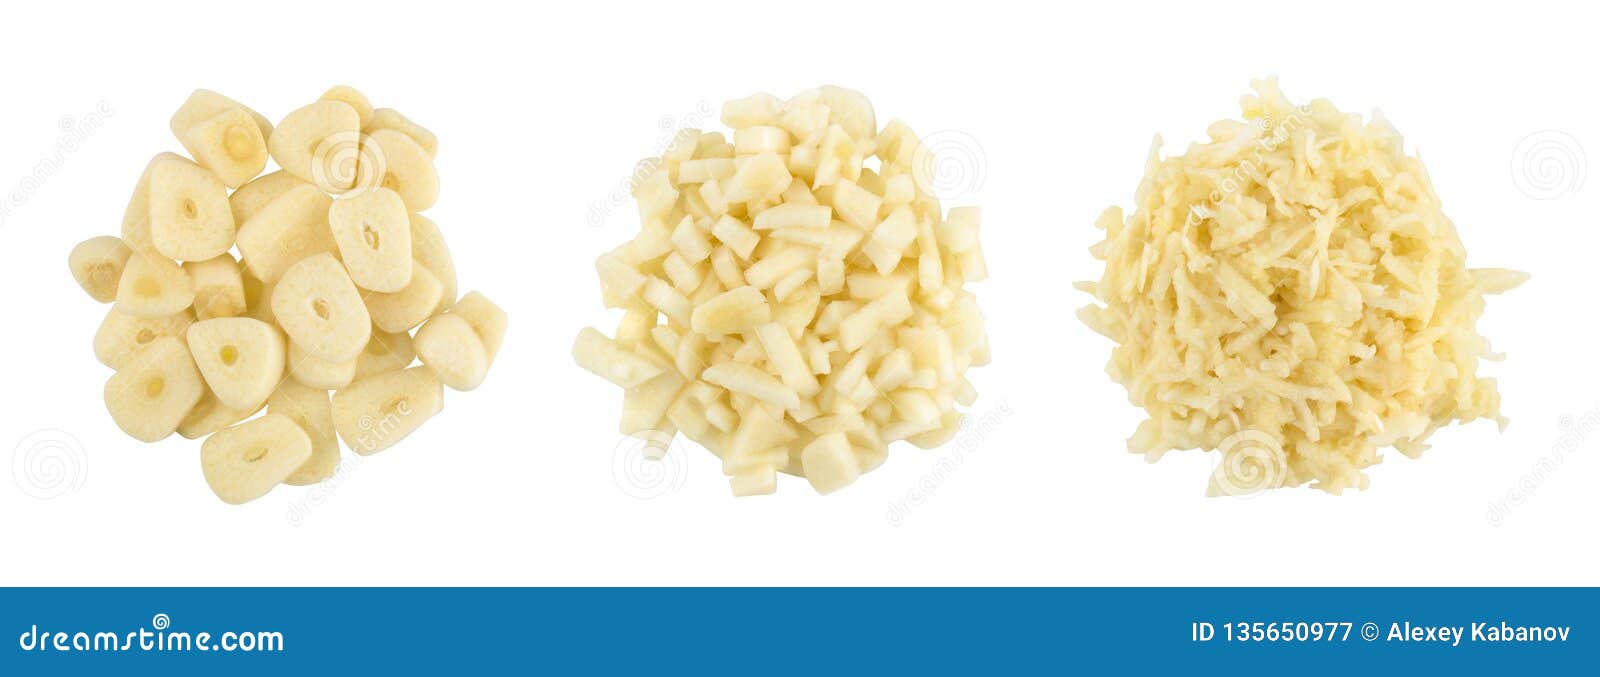 finely chopped garlic, grated garlic, set of three kinds  on white background, top view.